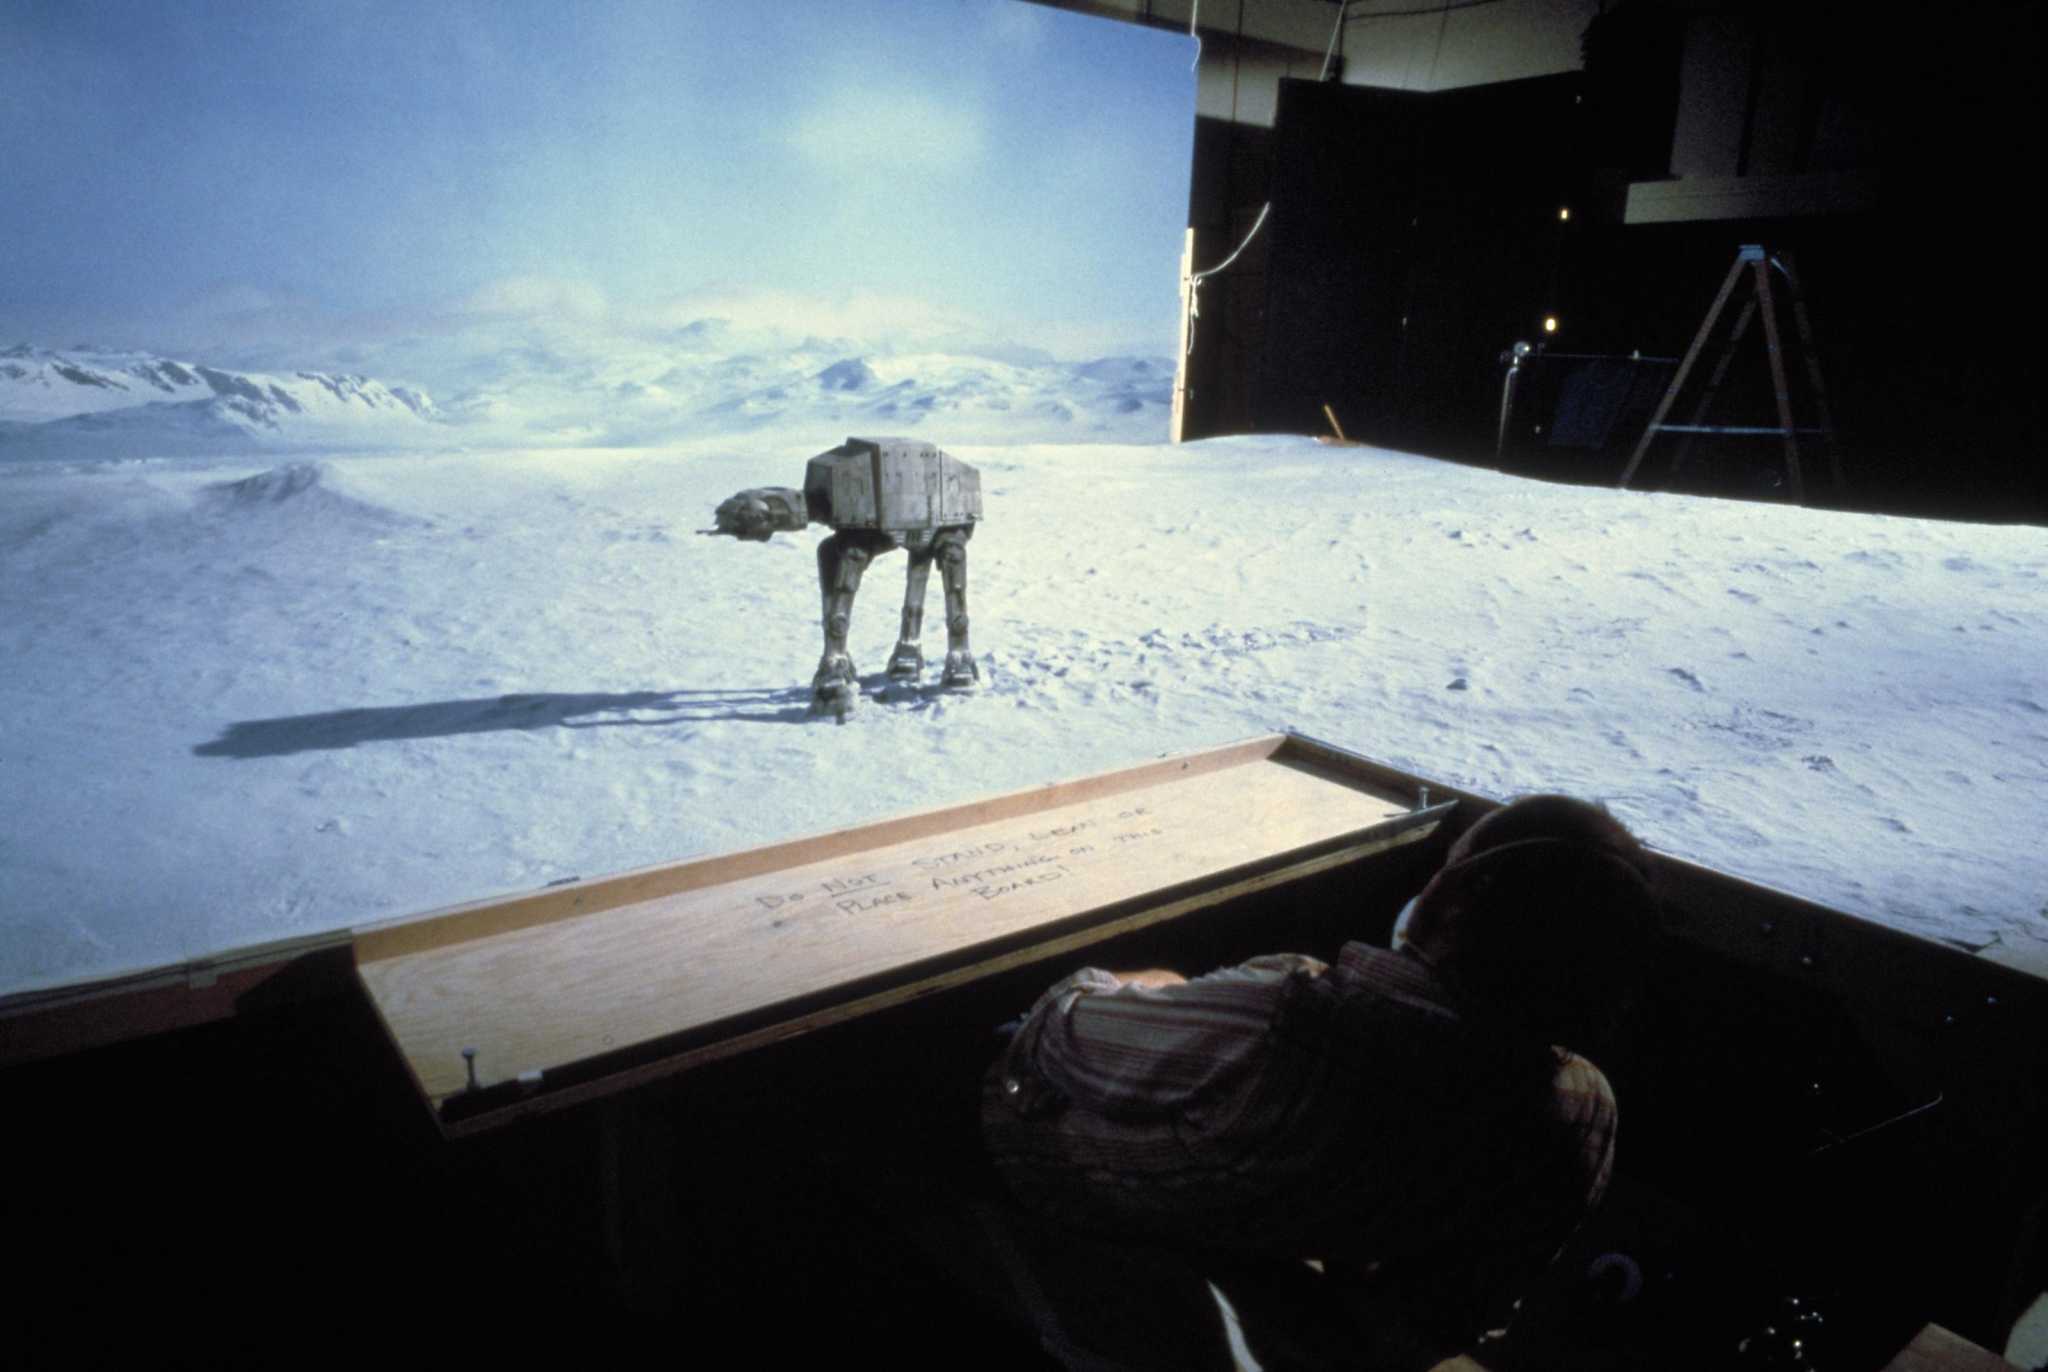 The Oakland-inspired 'Star Wars' snow walkers? The real story is so much  better than the myth